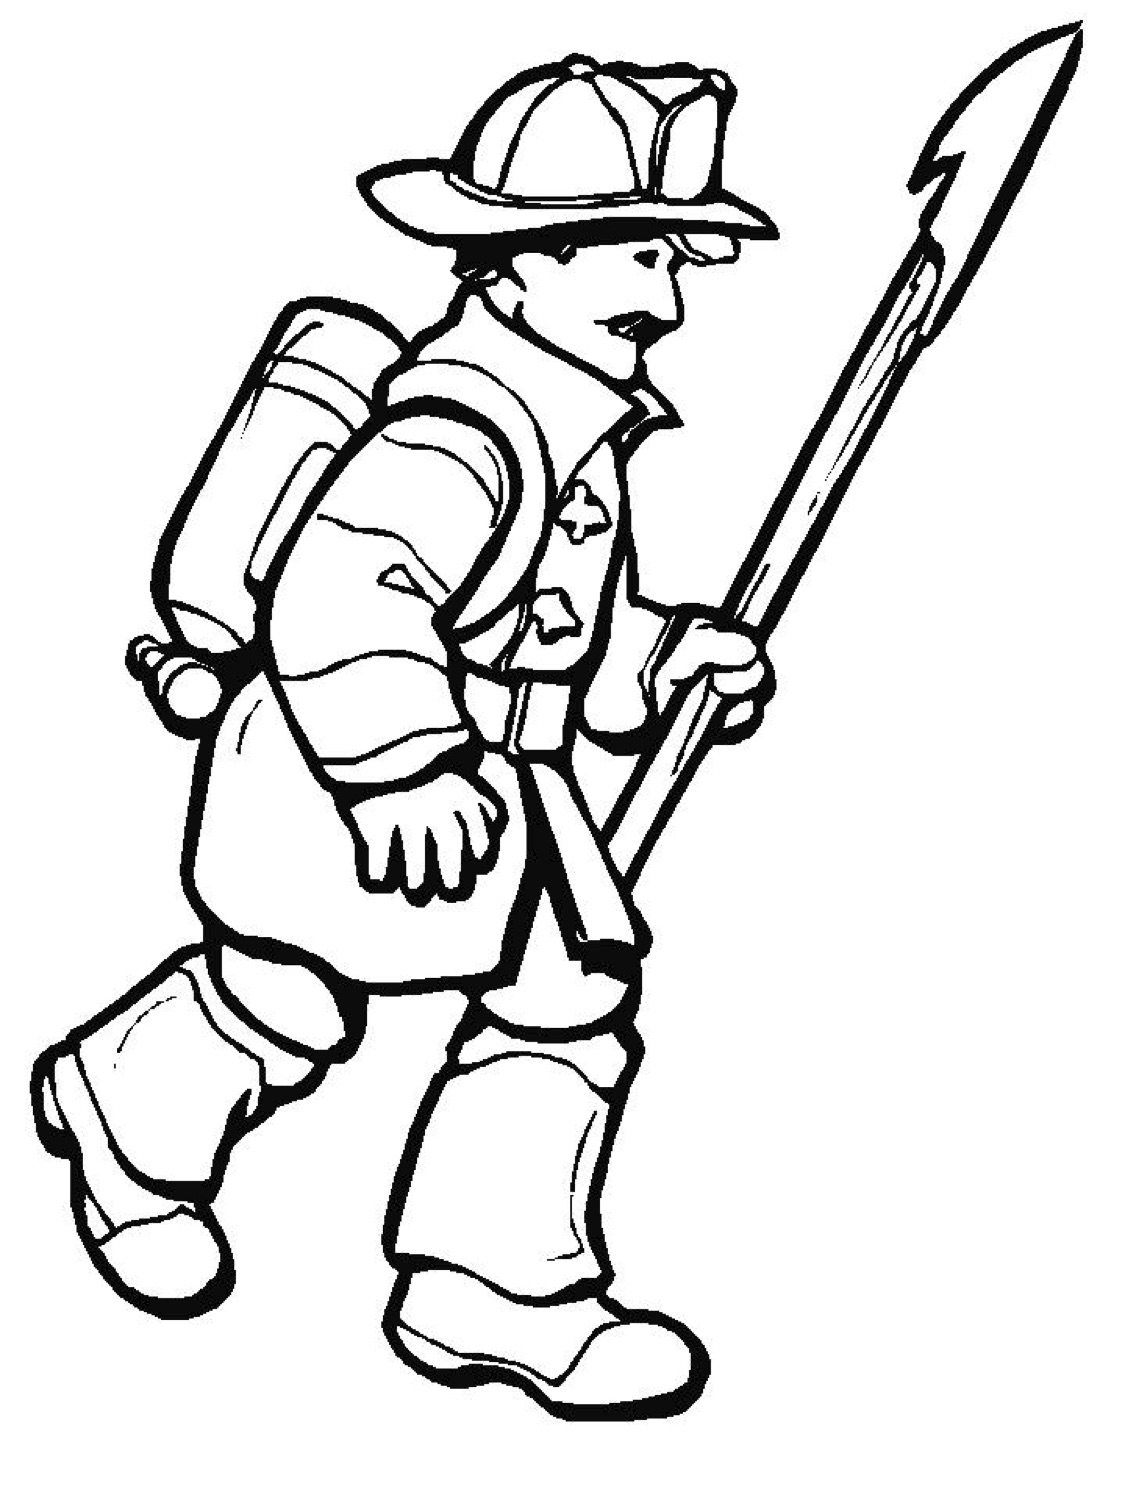 Firefighter with Axe